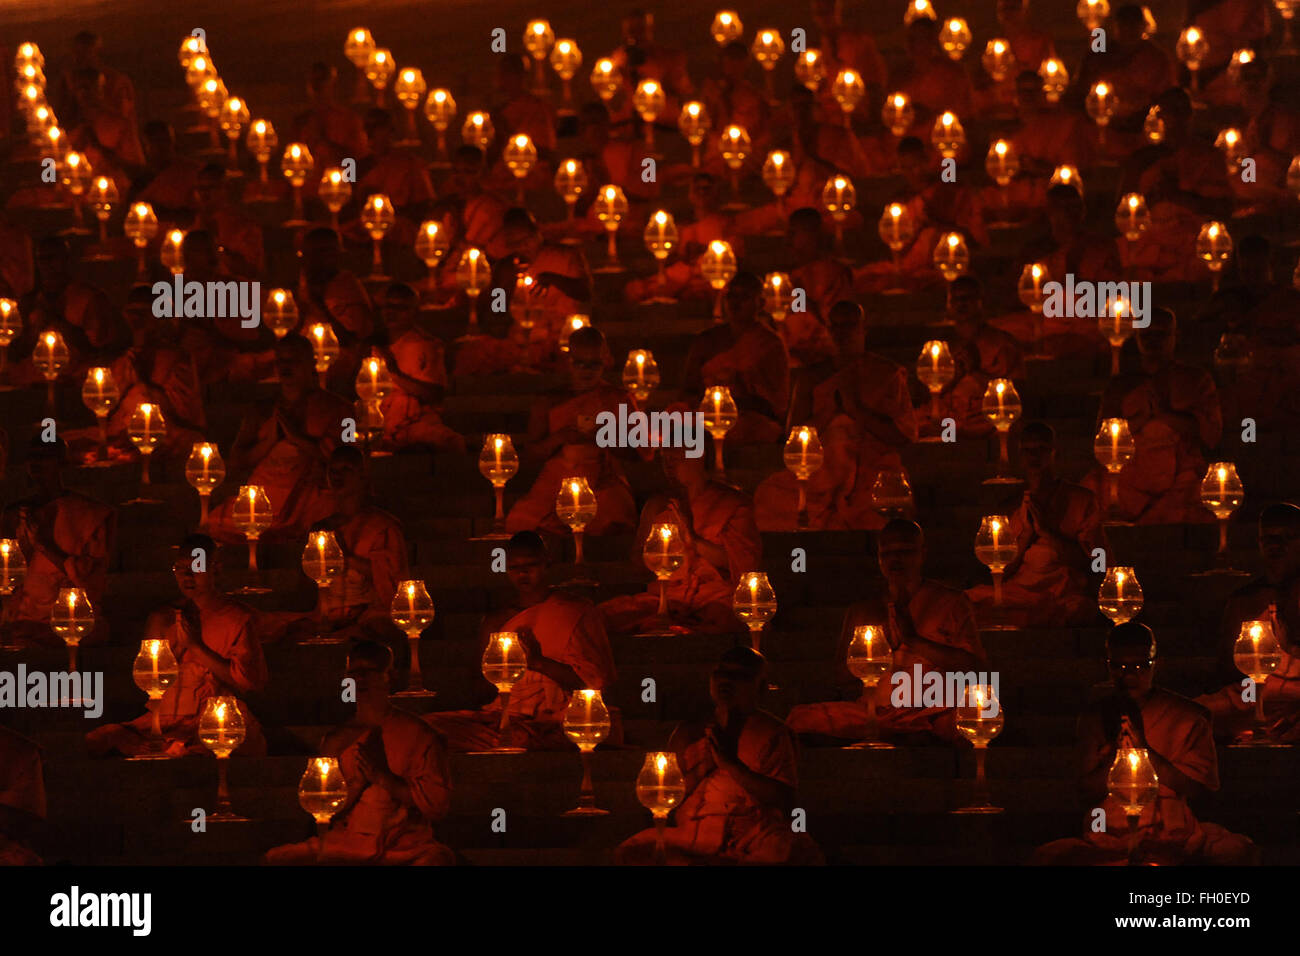 Pathum Thani, Thailand. 22nd Feb, 2016. Thai Buddhist monks light candles and pray during Makha Bucha Day ceremonies at Wat Phra Dhammakaya Temple in Pathum Thani Province, Thailand, on Feb. 22, 2016. As one of Thailand's most important Buddhist festivals, Makha Bucha is observed every full moon night of the third month in the Thai lunar calendar. On the Makha Bucha day, people flock to temples and venerate Buddhas as well as pray for blessedness. Credit:  Rachen Sageamsak/Xinhua/Alamy Live News Stock Photo